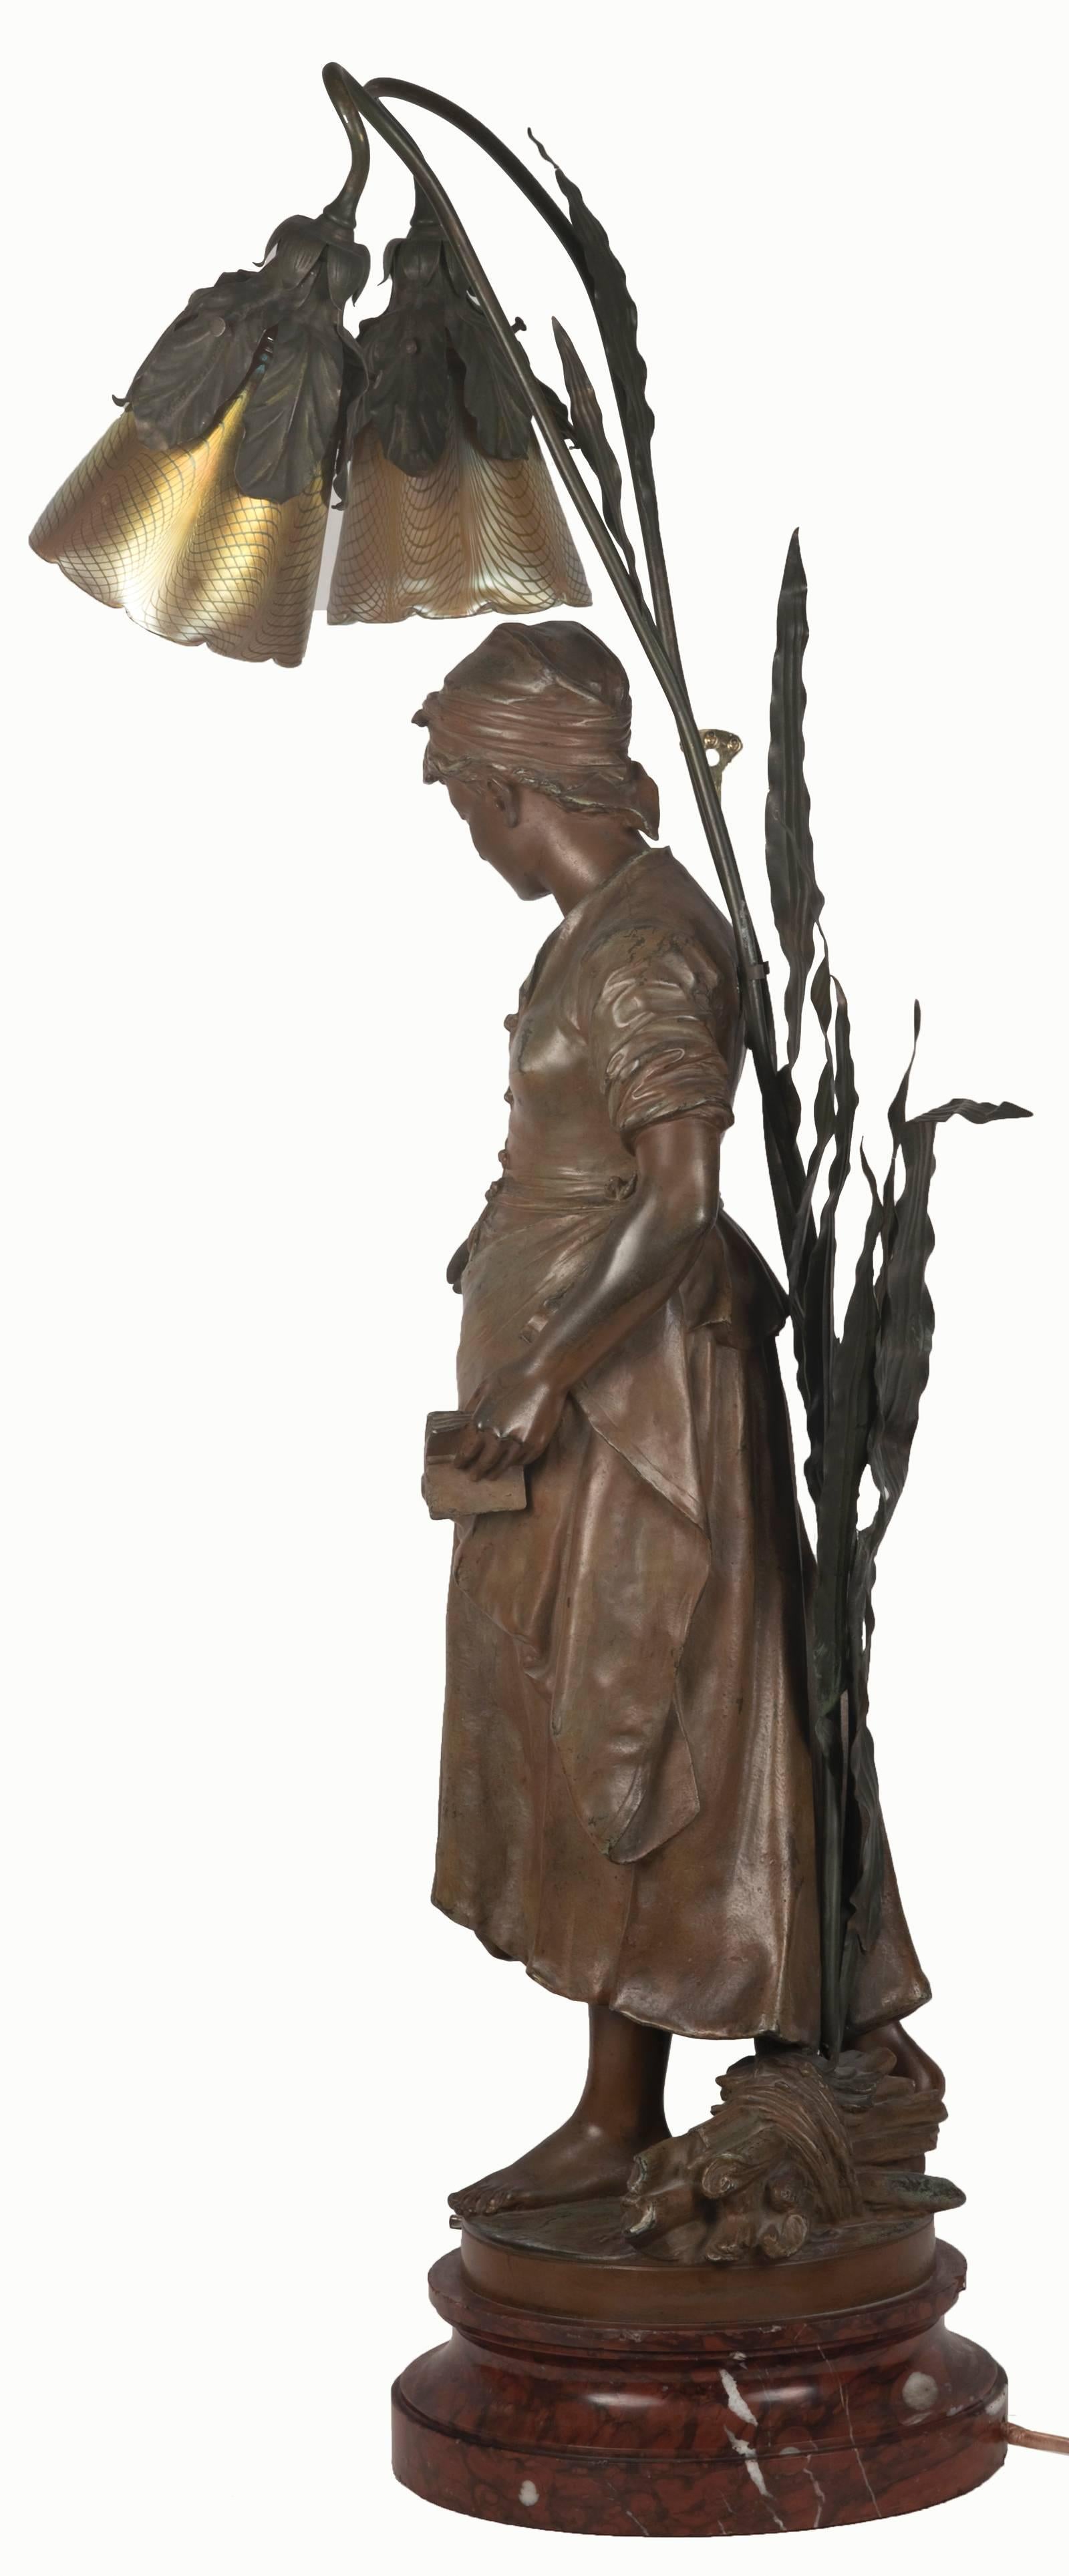 A finely detailed depiction of a female peasant dressed in simple garments, head wrap and apron, holding a small book in one hand while reaching out with the other. A small bushel of sticks sits at her bare feet. The original spelter figure, signed